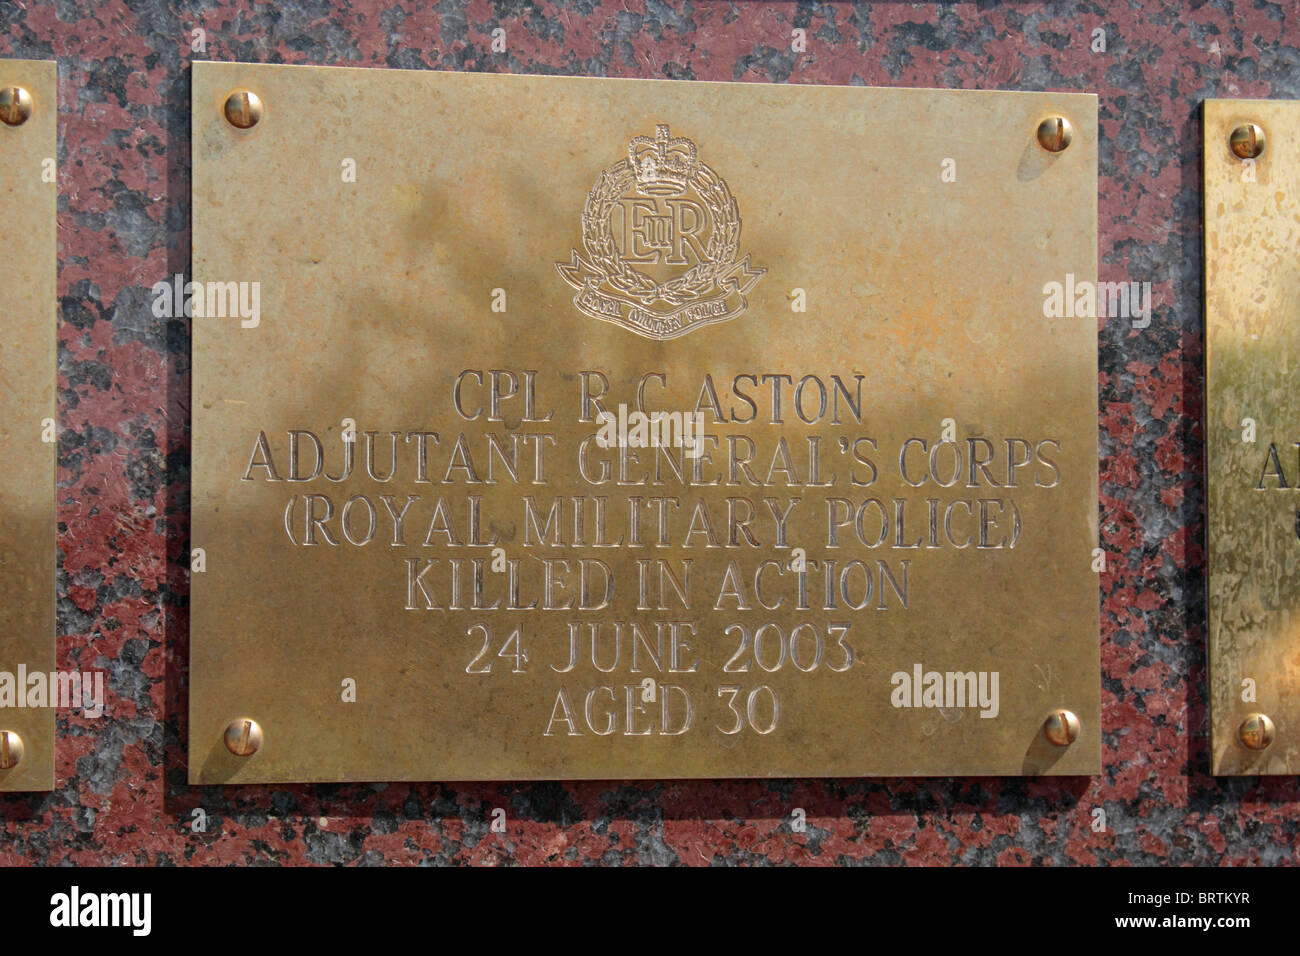 Name plate for CPL RC Aston, Royal Military Police on the Basra Memorial Wall, National Memorial Arboretum, Alrewas. Stock Photo